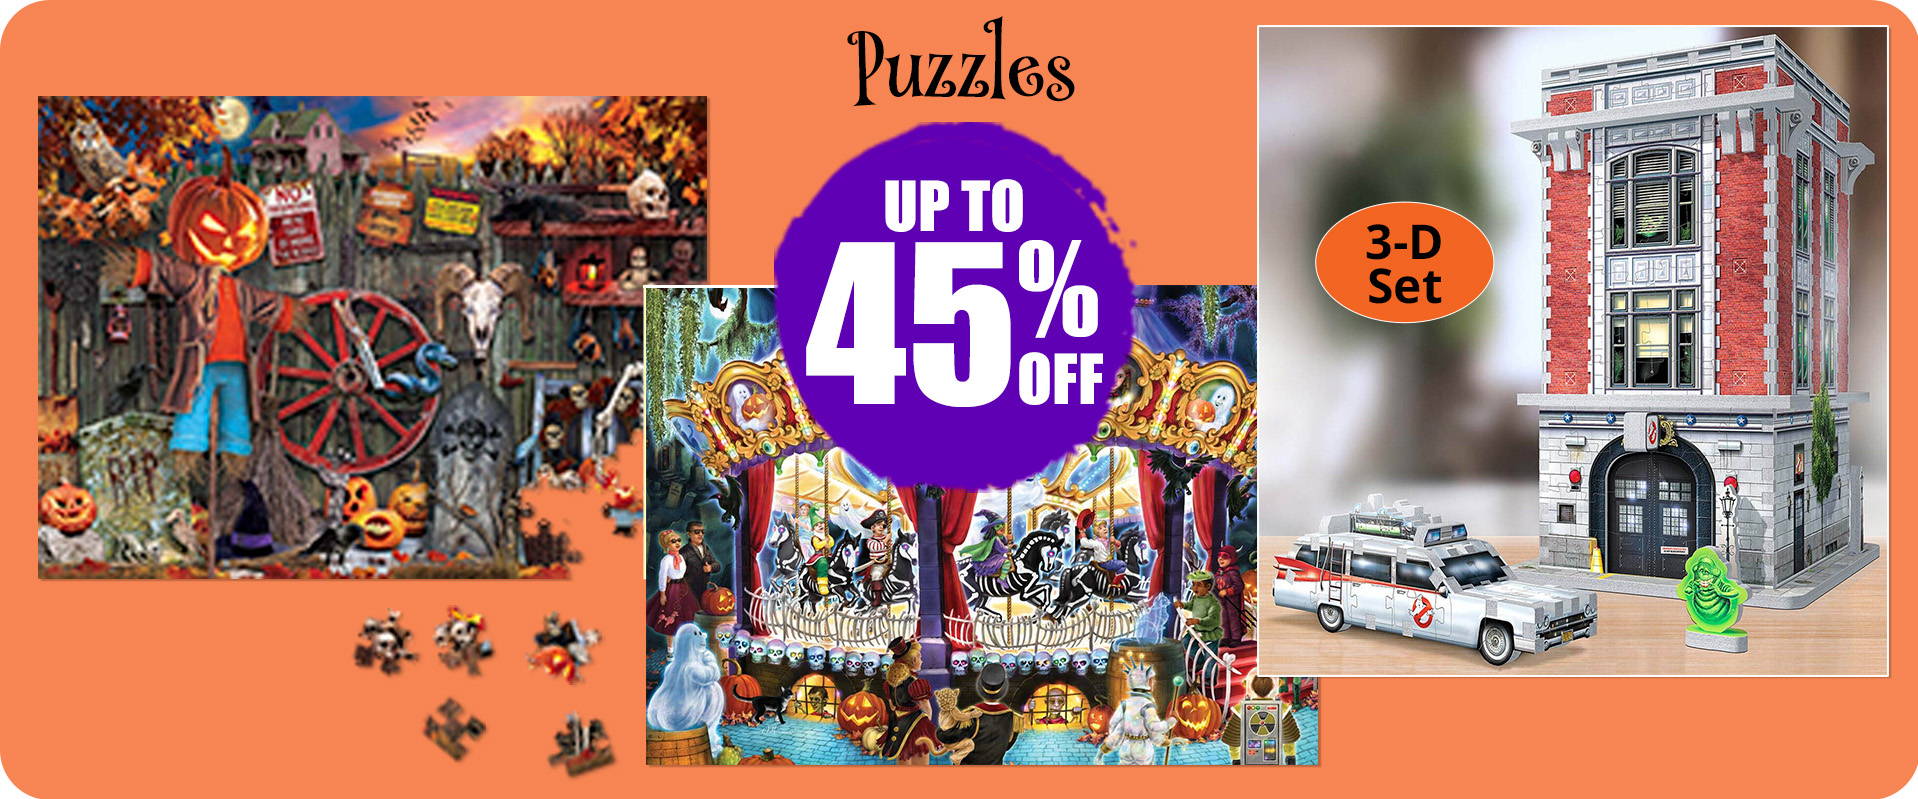 Puzzles up to 20% off. Image: Wrebbit Ghostbusters 3D Puzzle and featured Halloween puzzles.